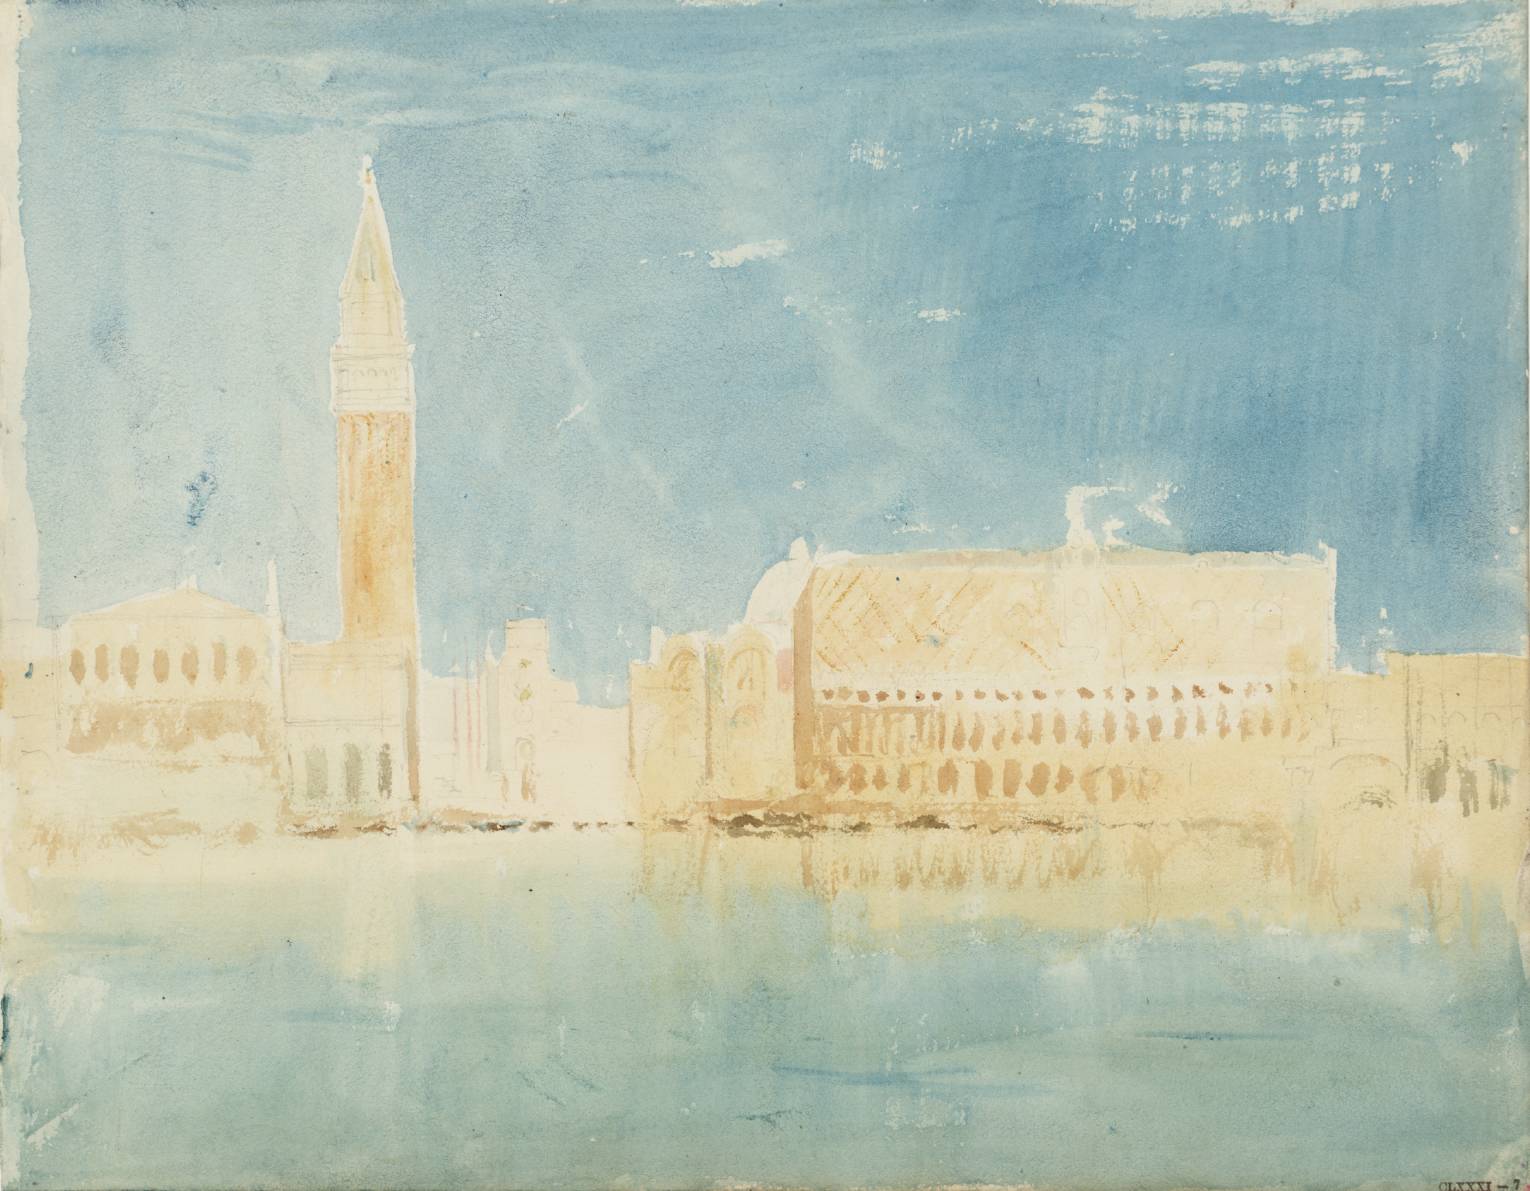 Venice: The Campanile and the Doge's Palace, 1819